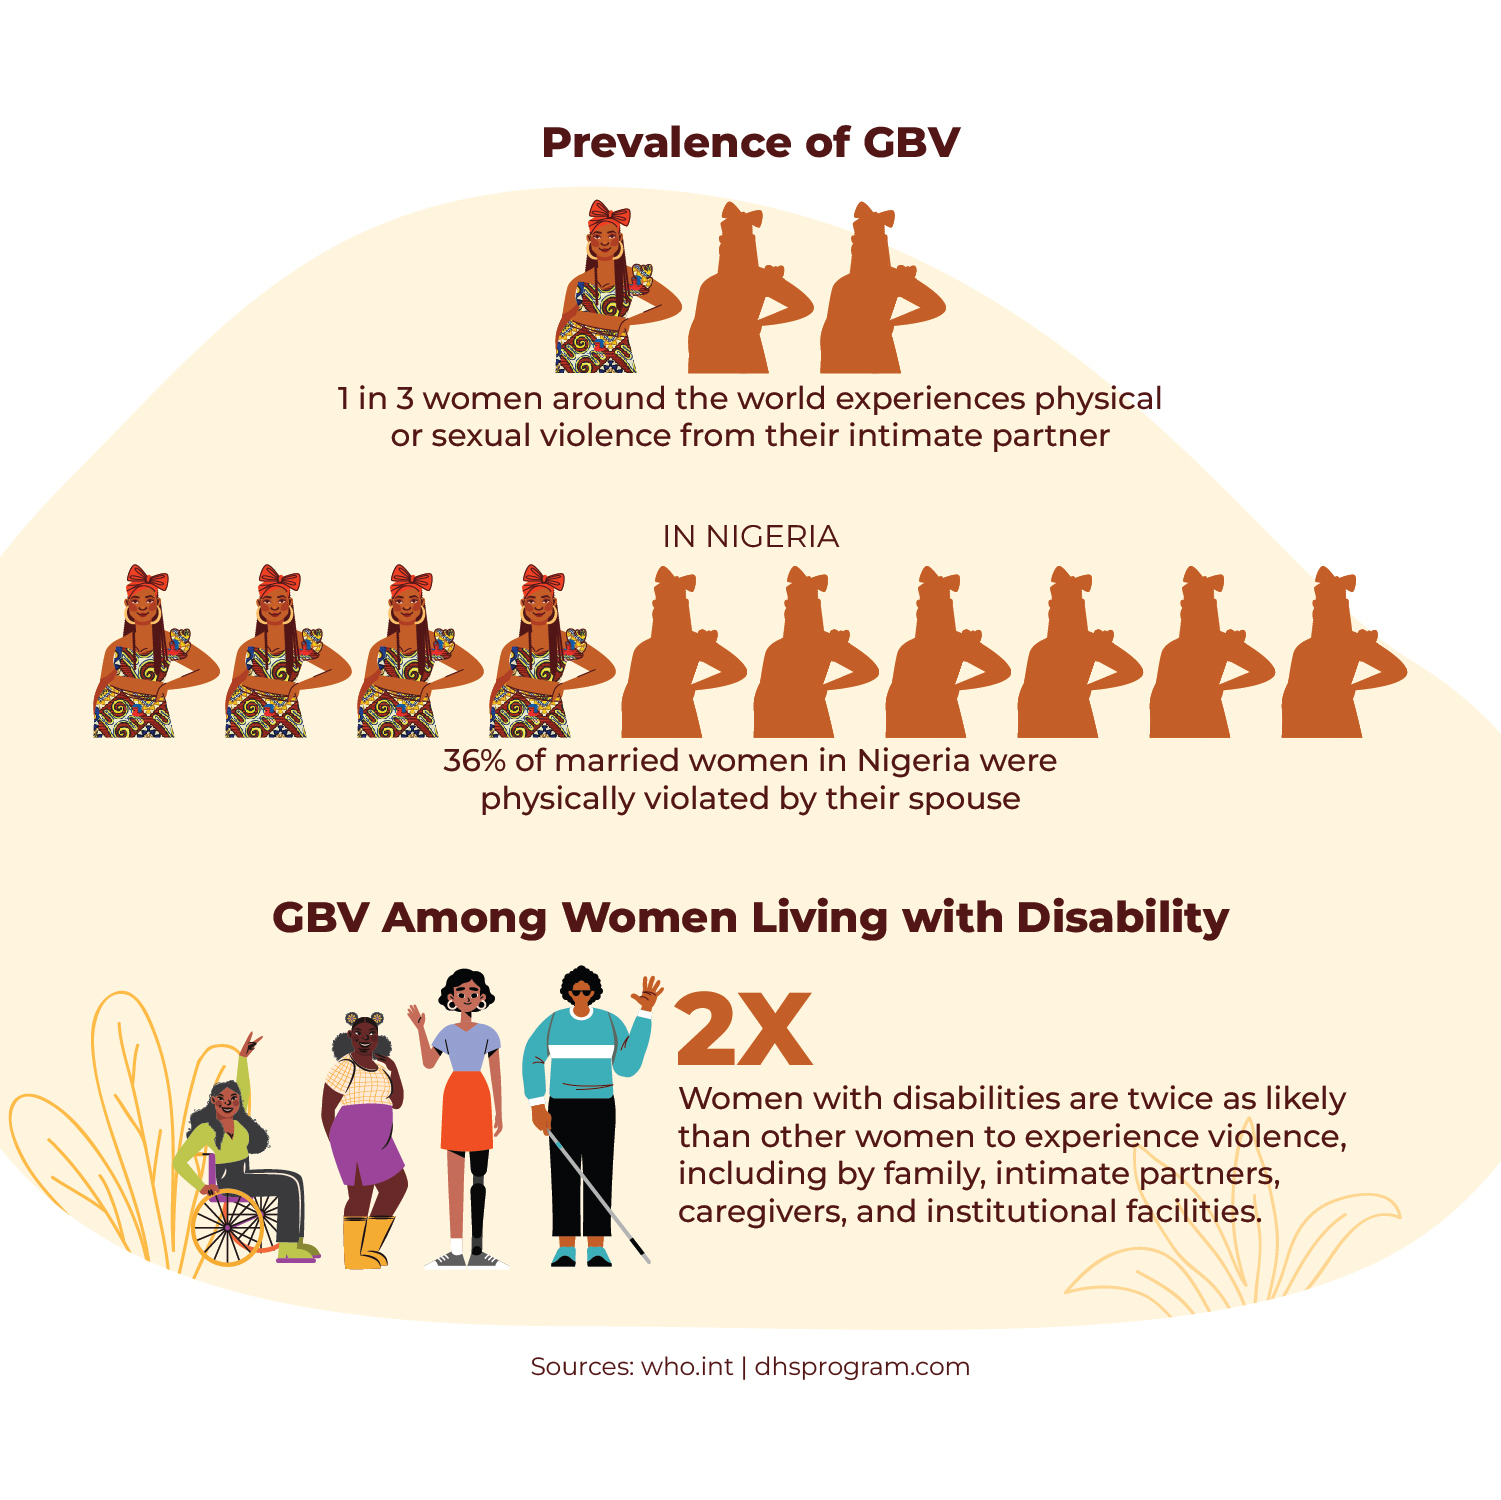 Infographics on Prevalence of Gender Based Violence in Nigeria and among Women living with disability